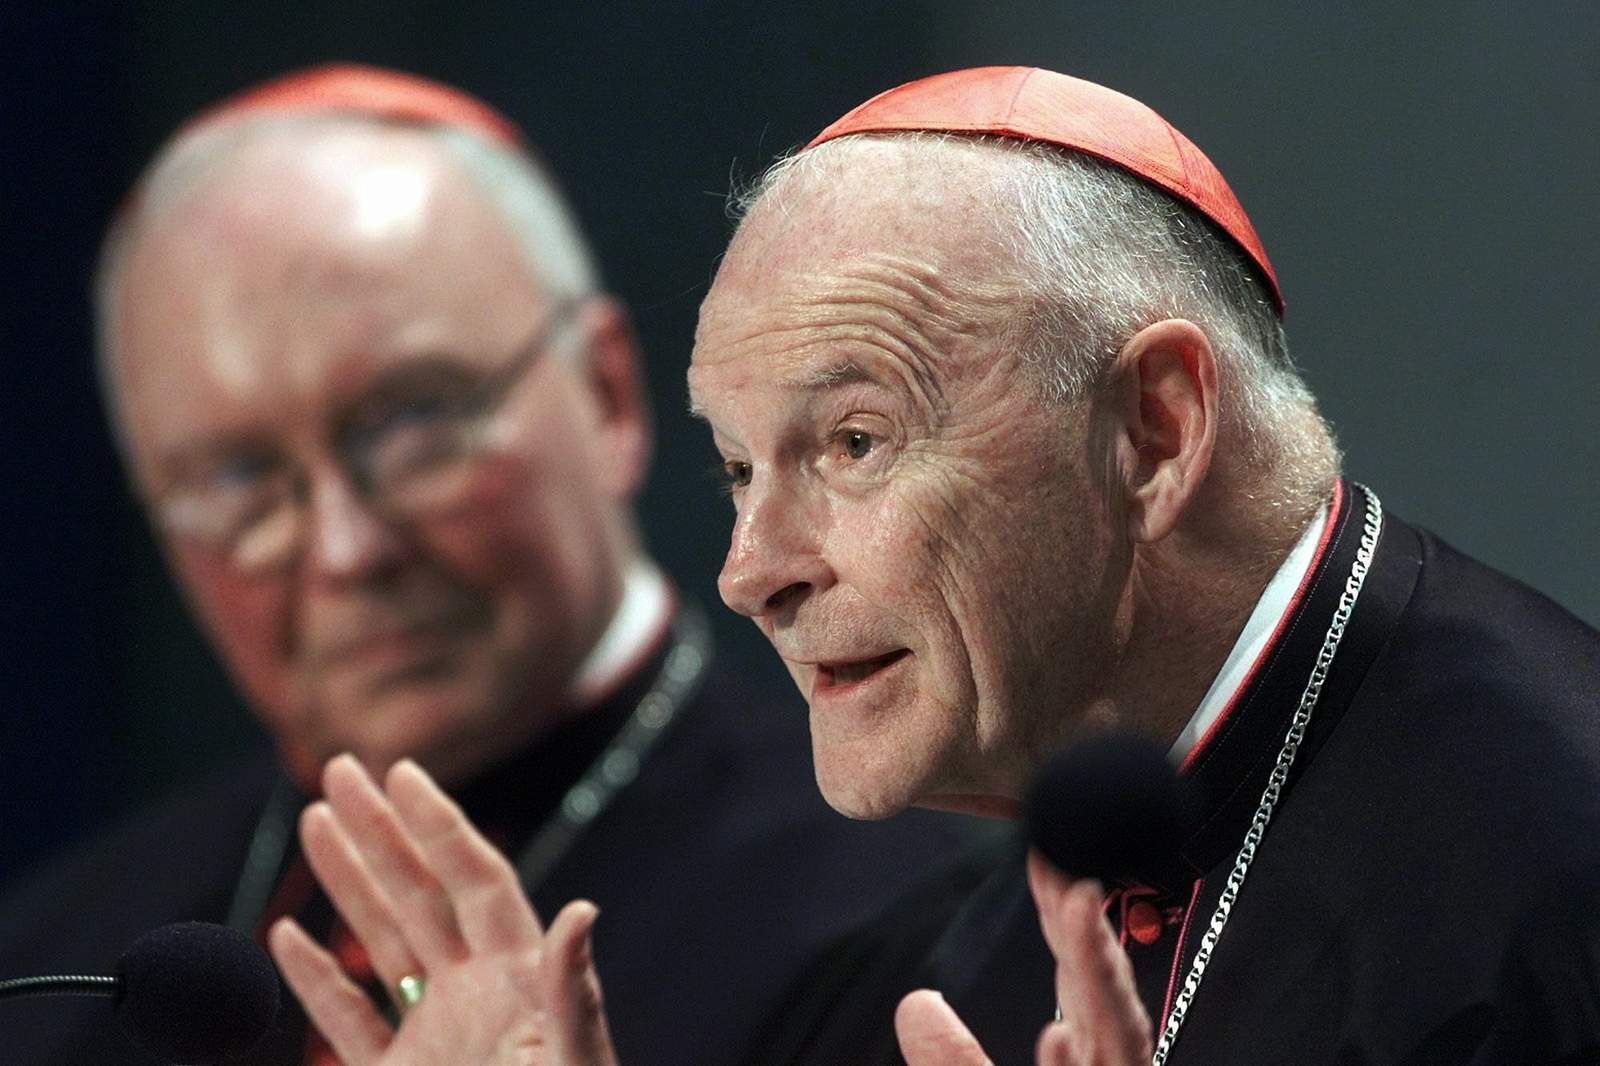 Vatican faults many for McCarrick’s rise, spares Pope Francis